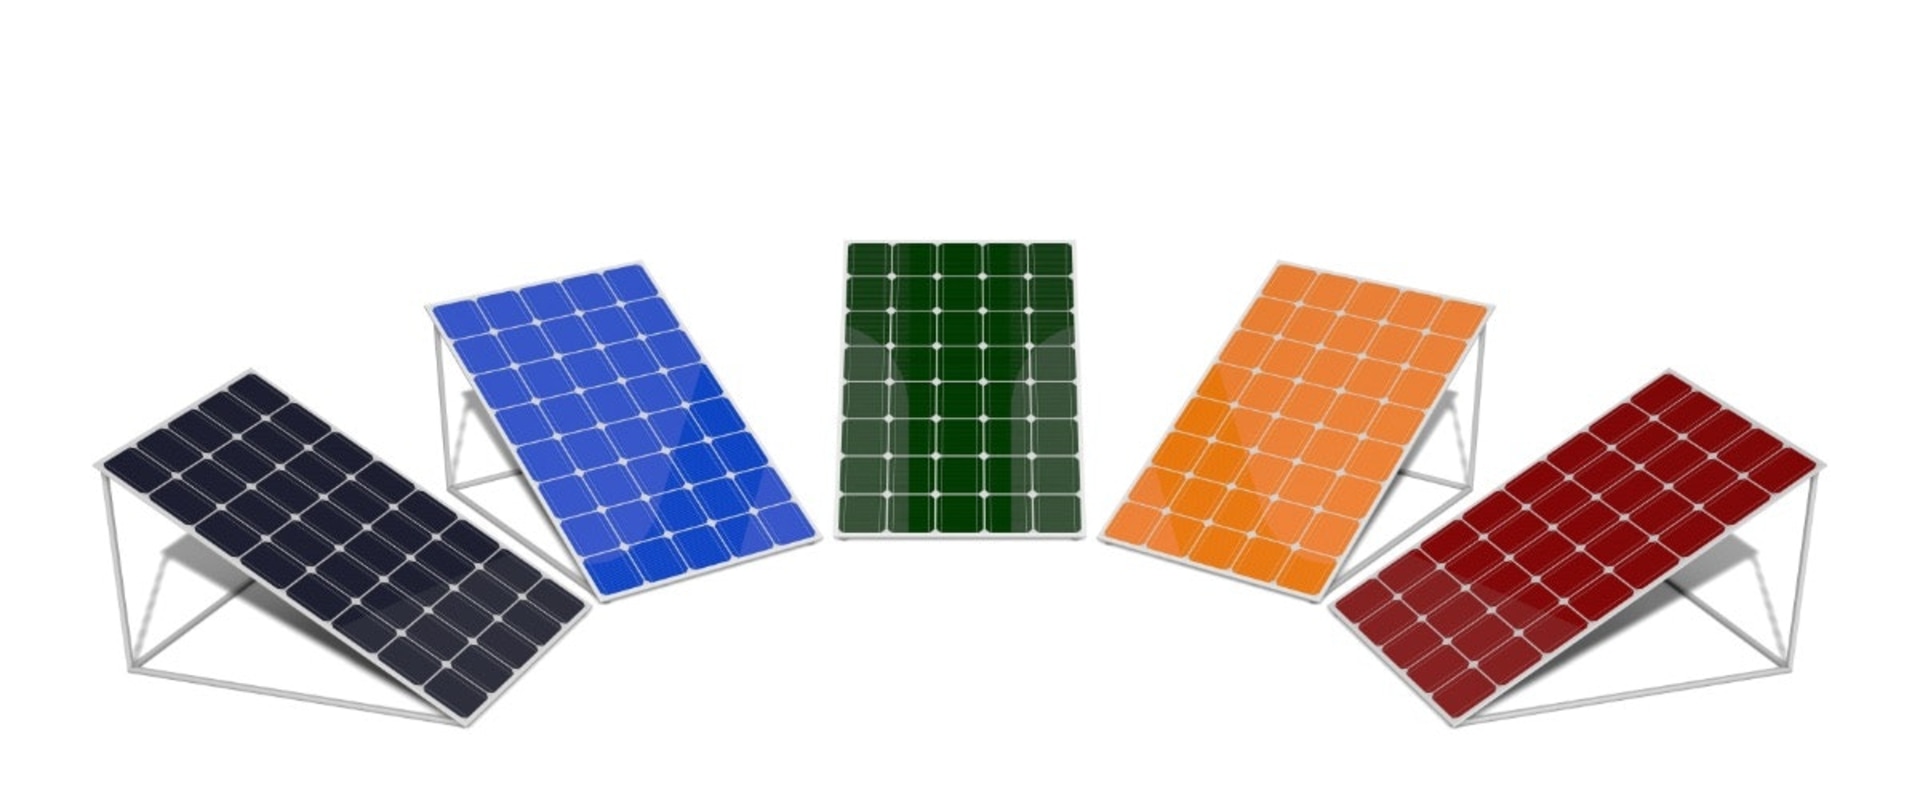 What is the Most Common Type of Solar Panel?